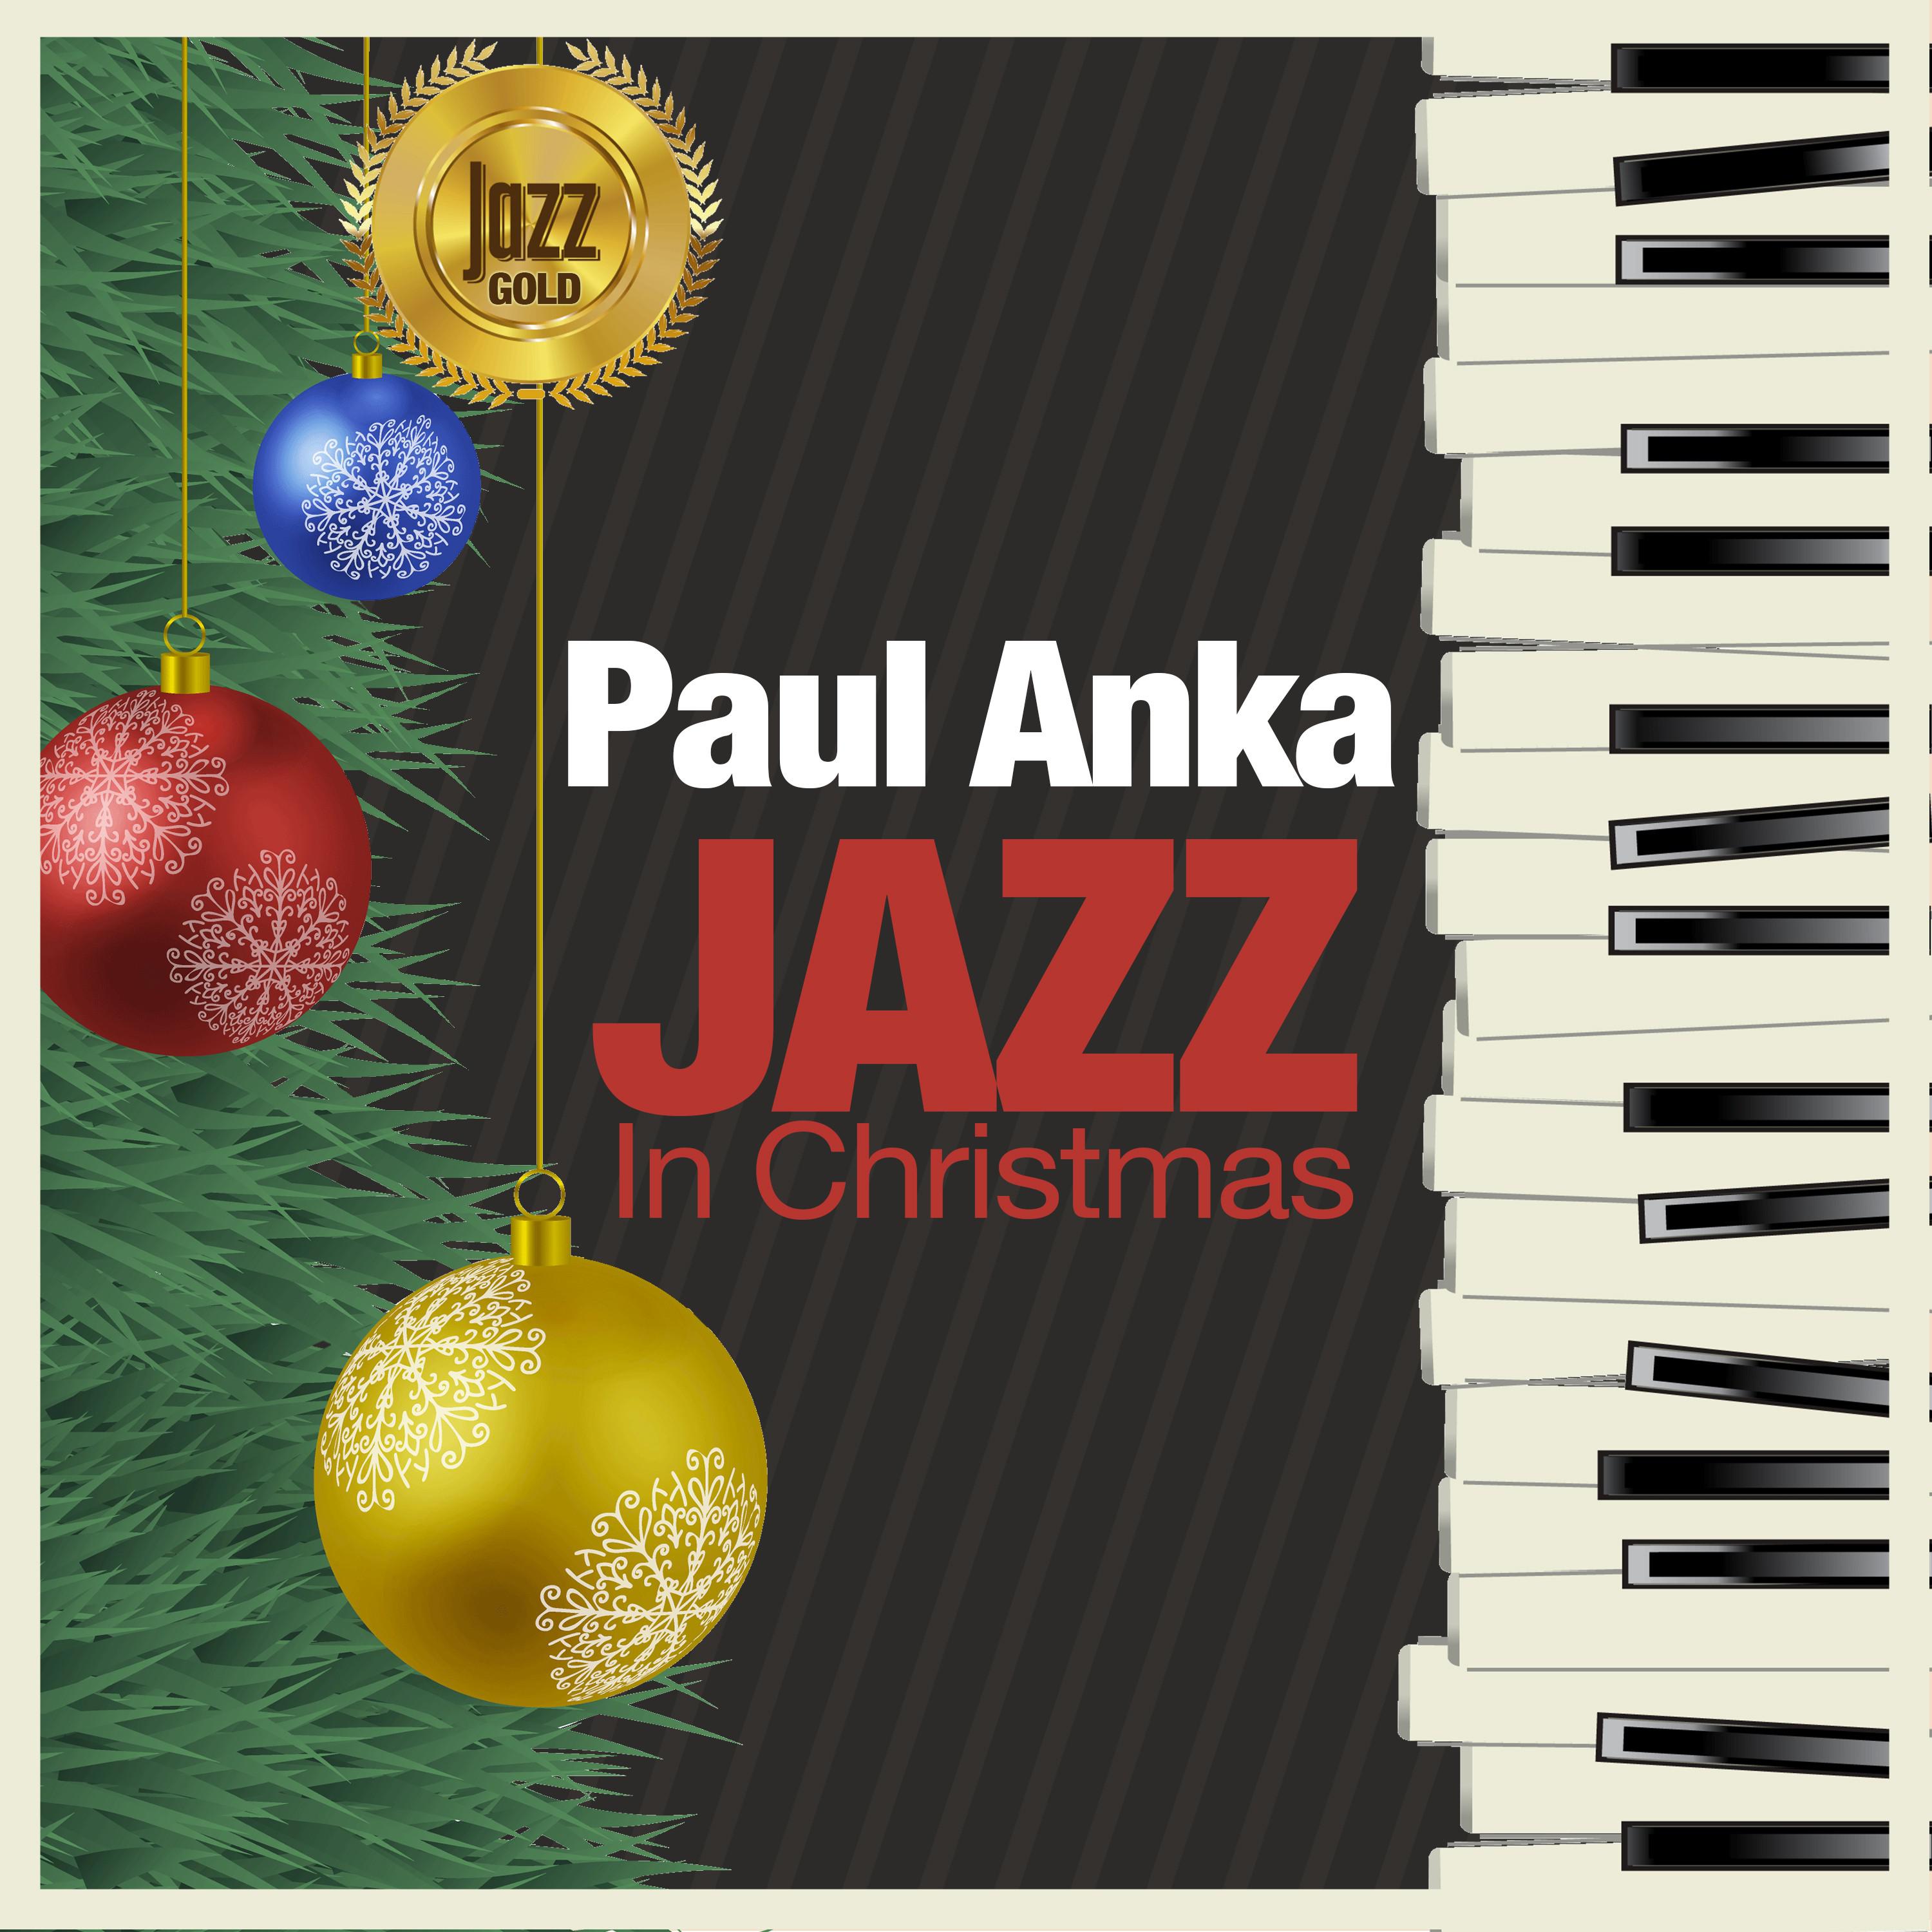 Jazz in Christmas